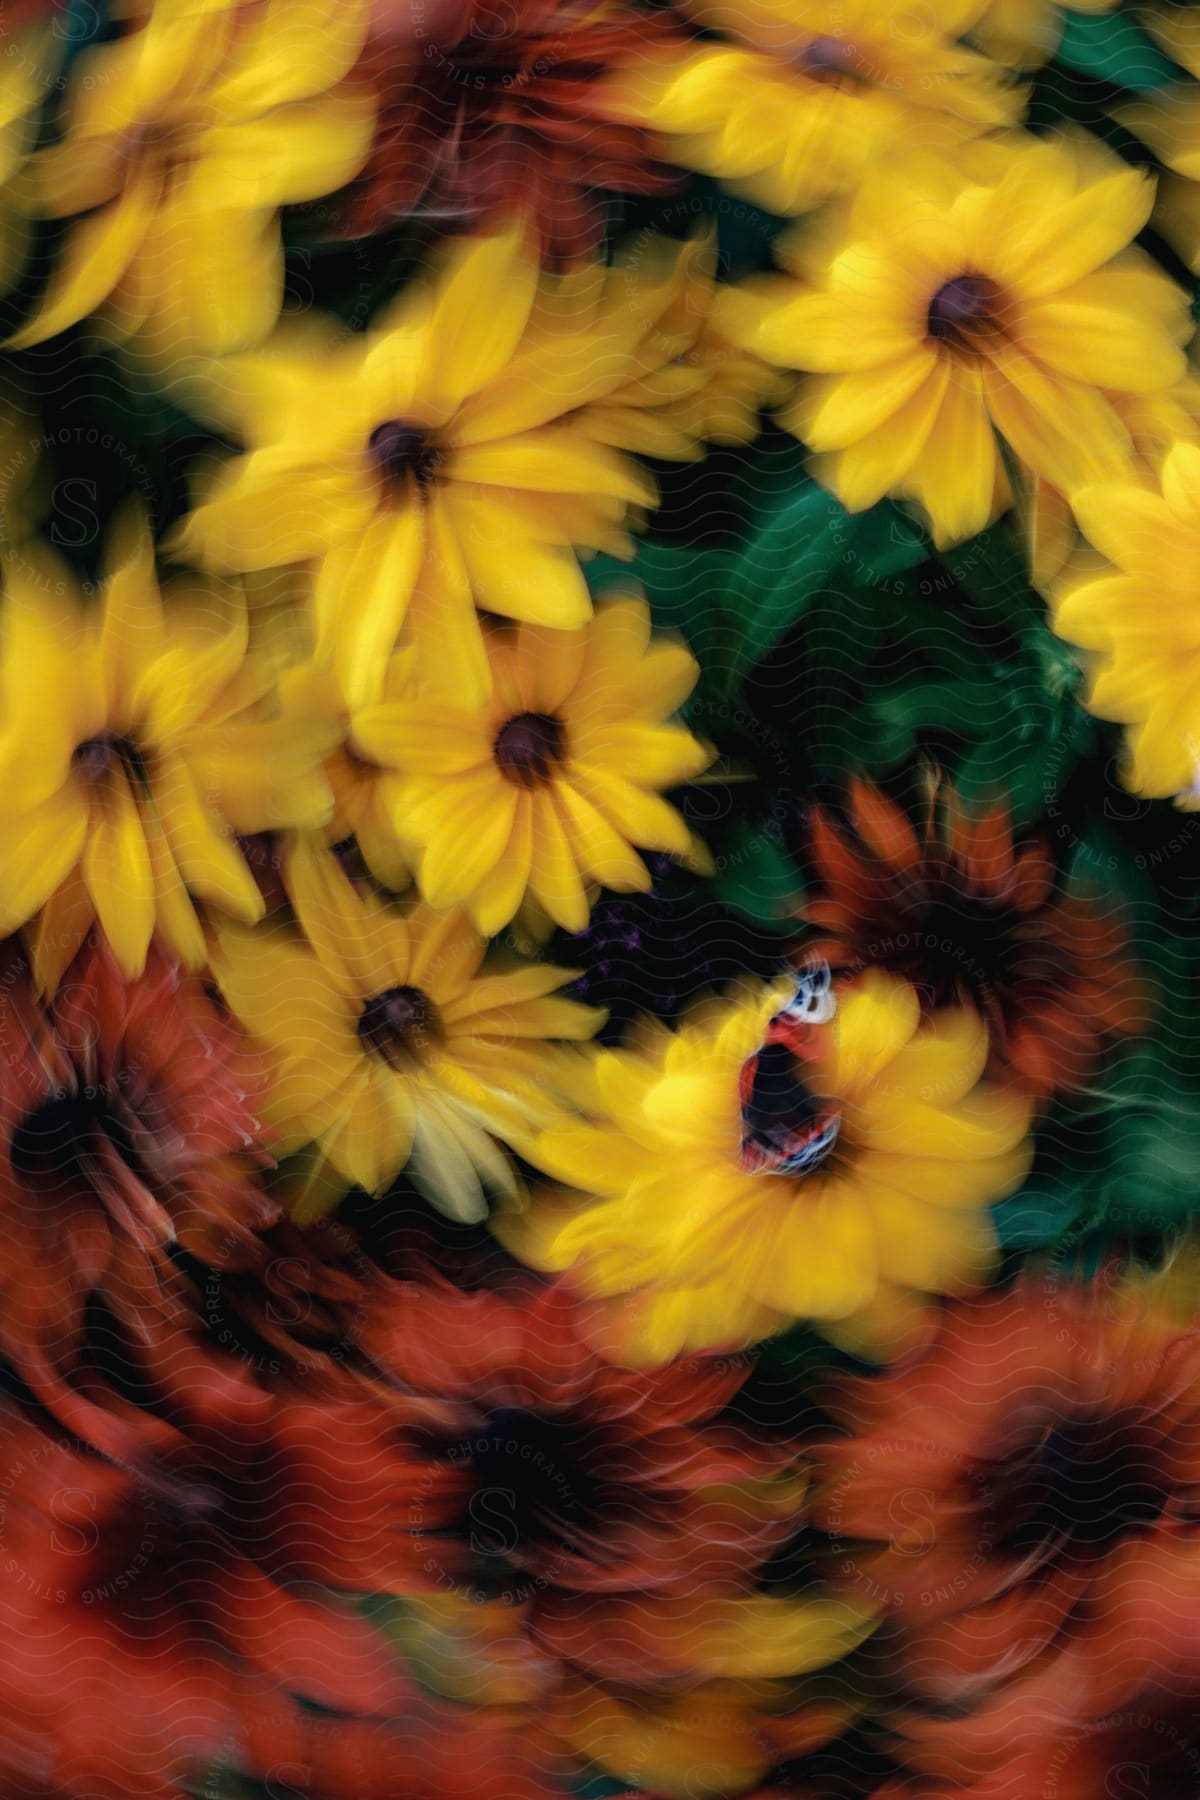 A swirling arrangement of yellow and orange sunflowers seen from above